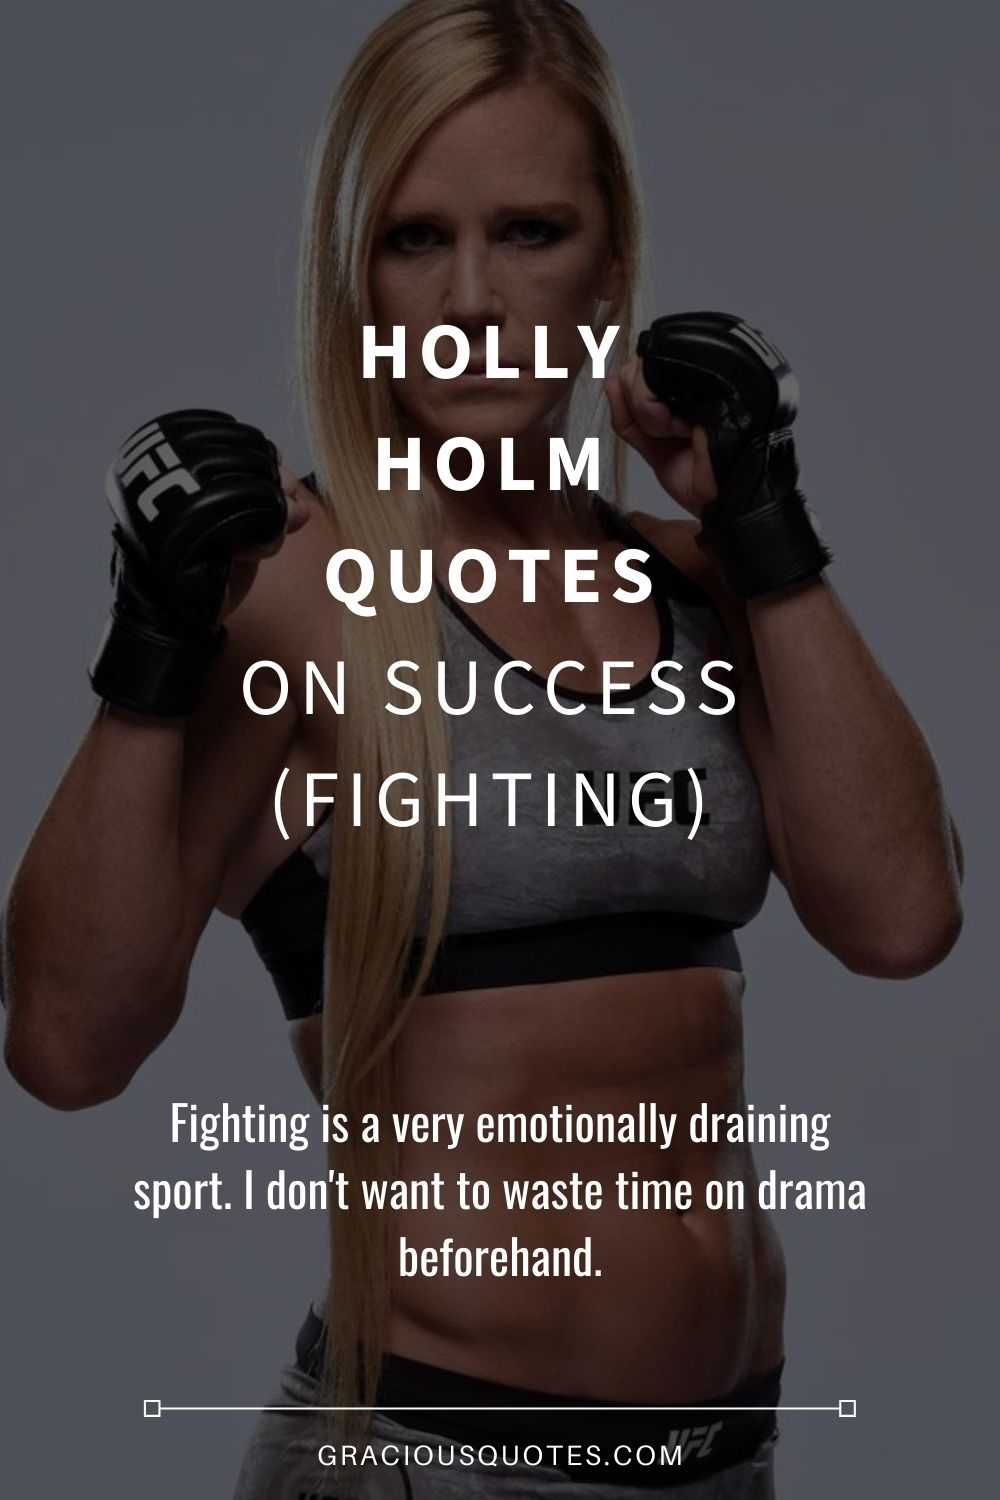 Holly Holm Quotes on Success (FIGHTING) - Gracious Quotes